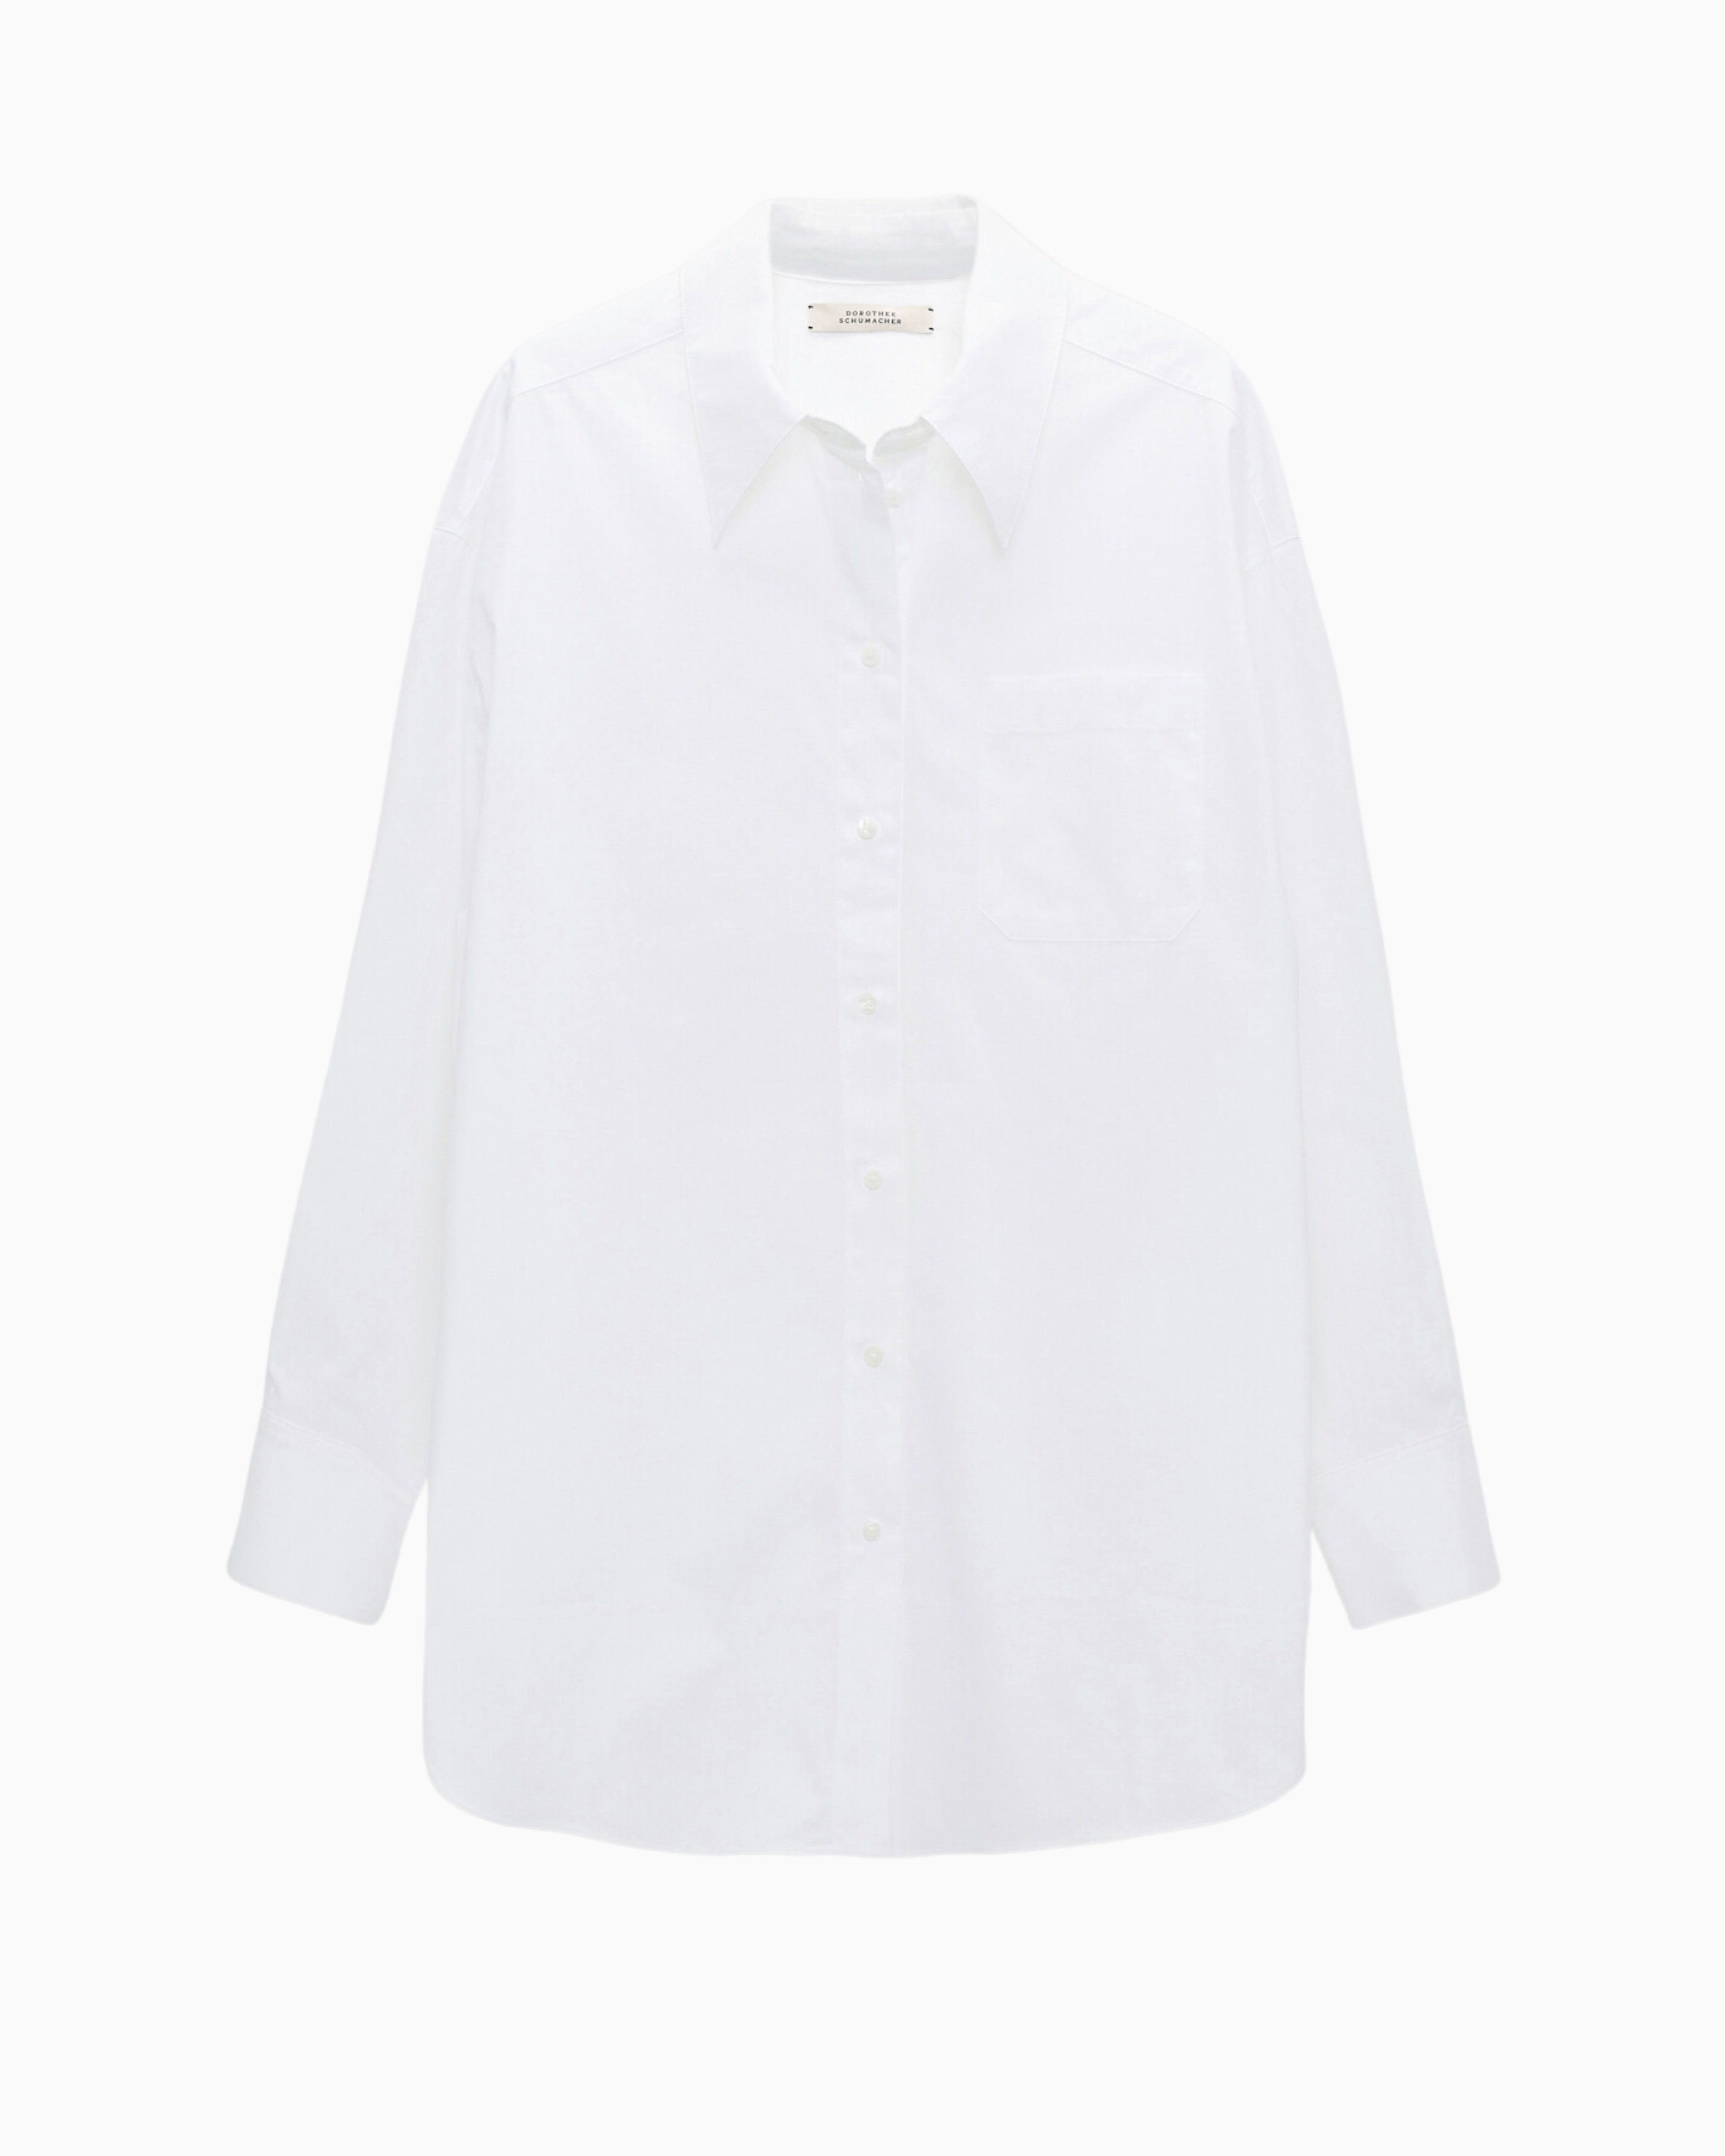 Dorothee Schumacher Power Blouse in Pure White